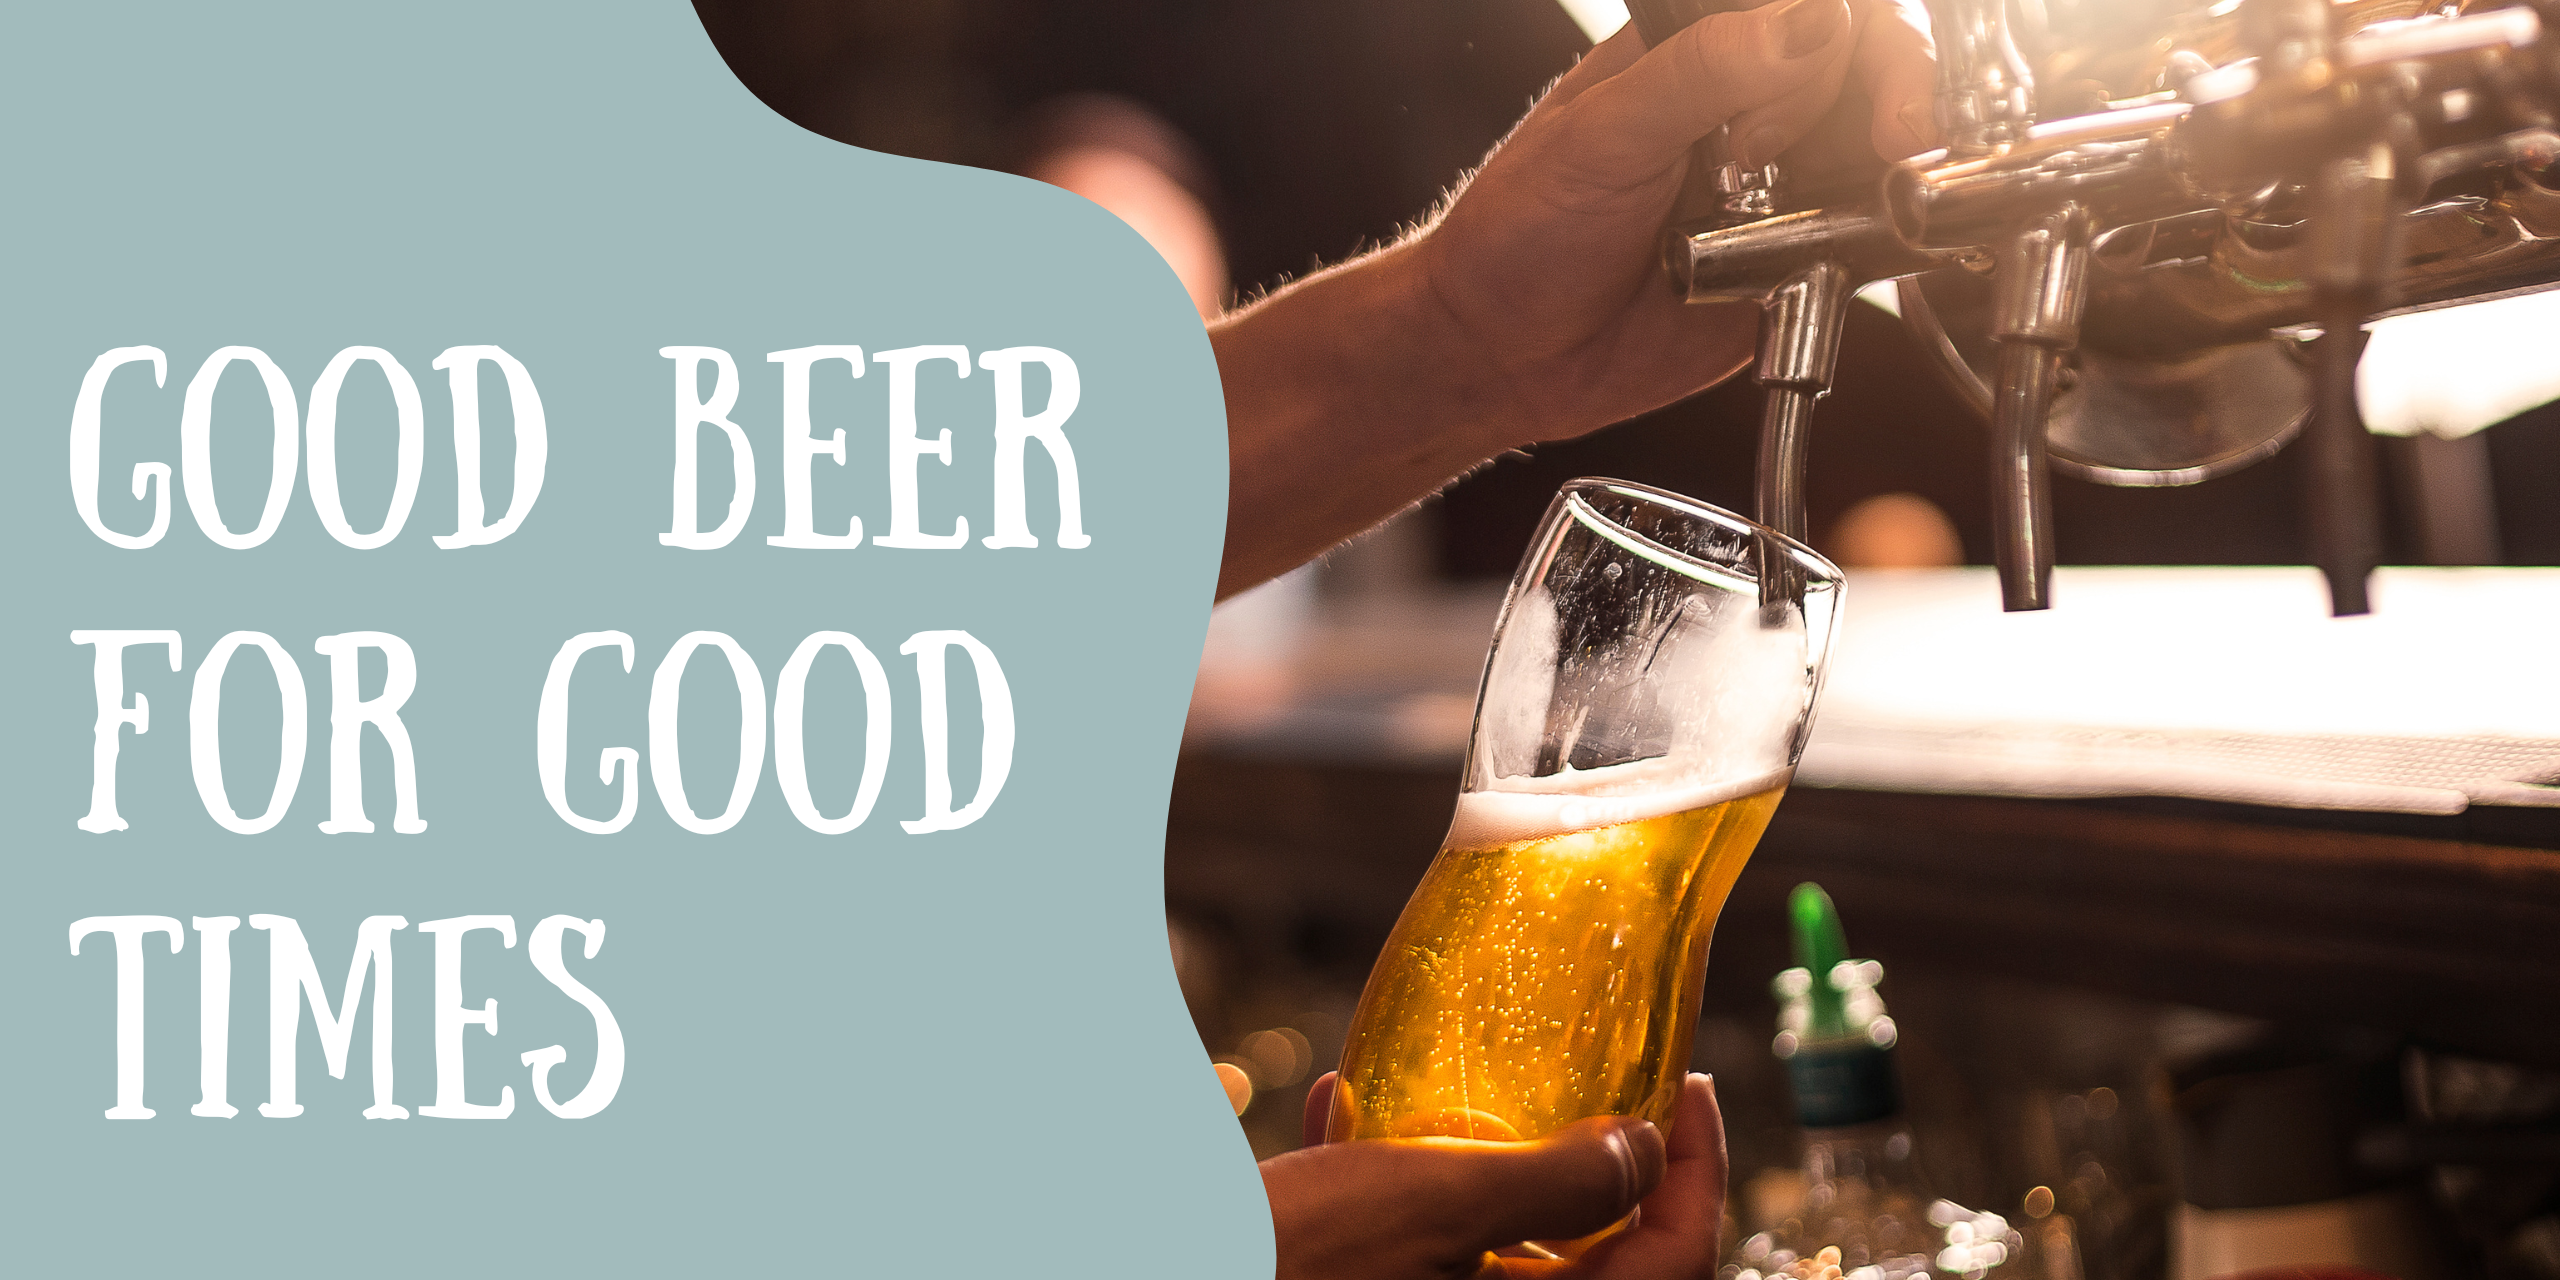 Banner image with man pouring a beer with text "Good Beer for Good Times"